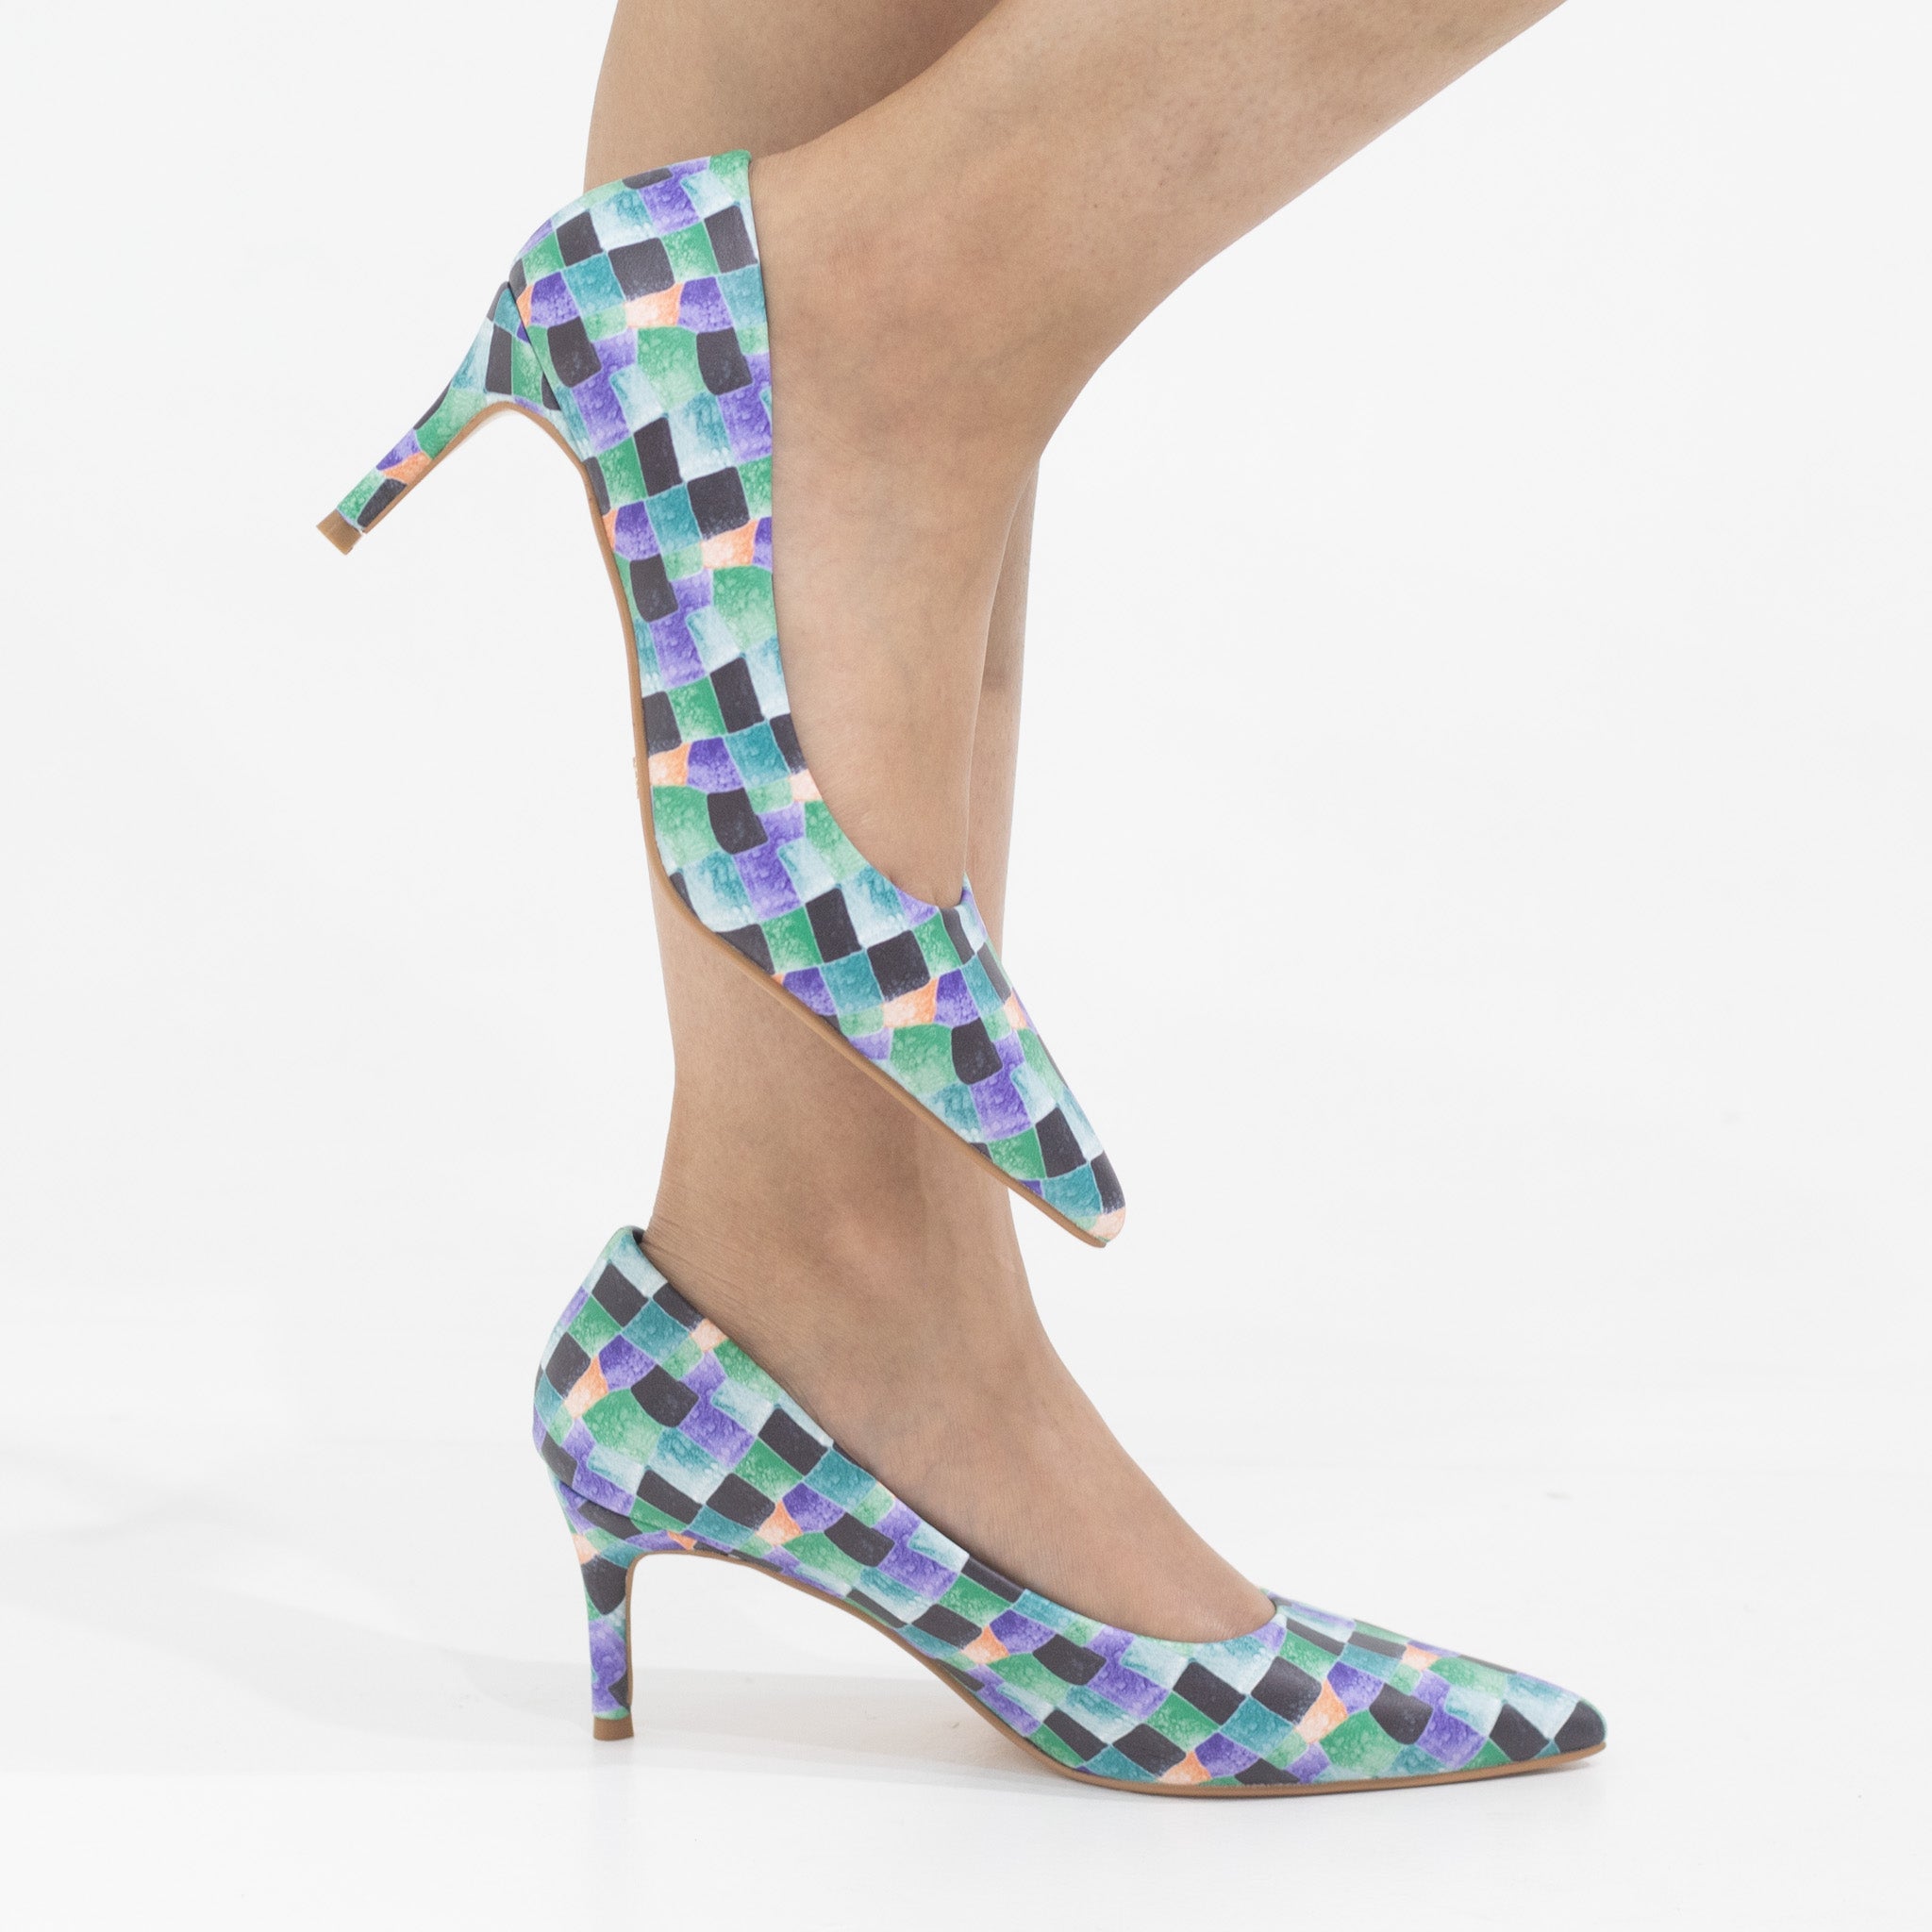 Blue 7cm heel  multi colored pointy court banu